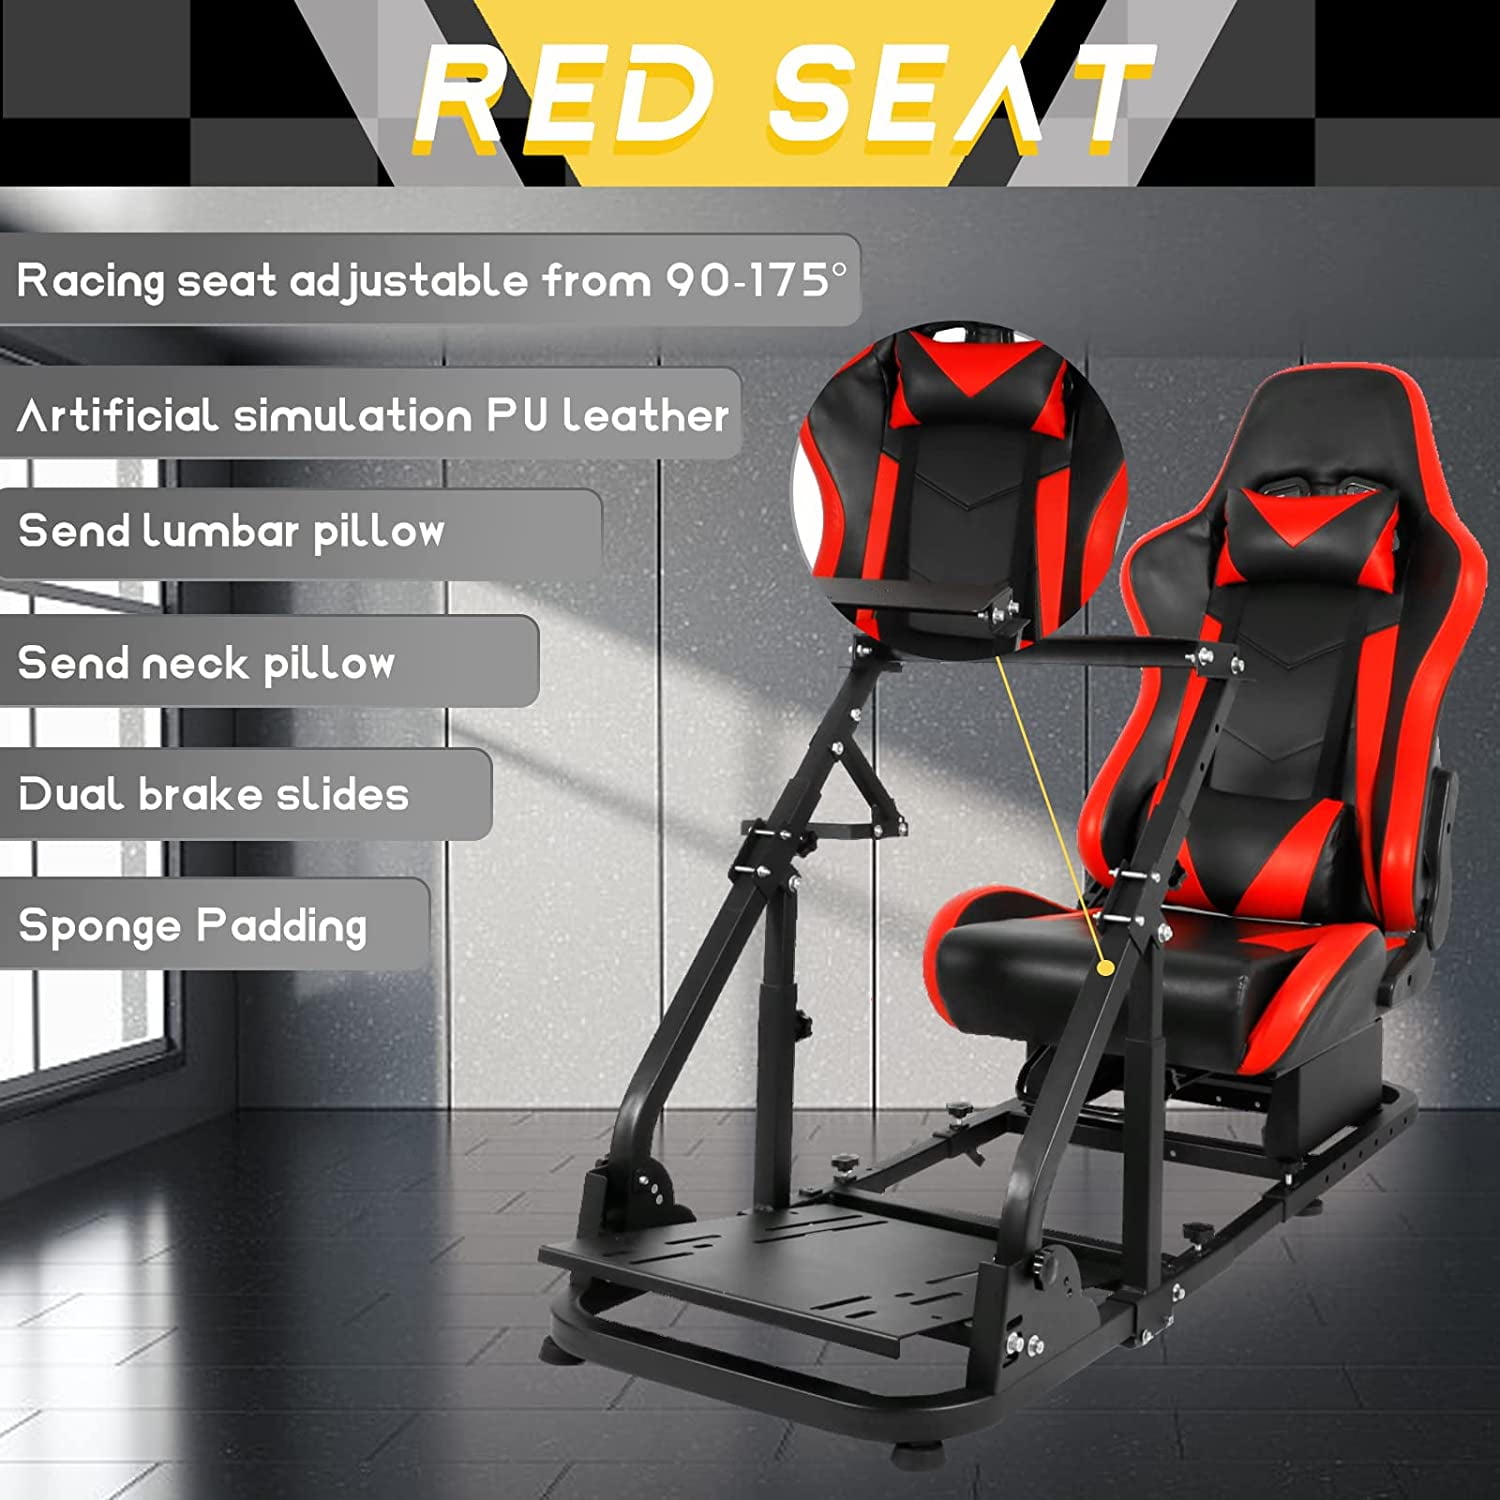 Marada Racing Cockpit With Black Seat (Cockpit 30) Adjustable ＆ Foldable  Compatible With Logitech G25 G27 G29 G920 Thrustmaster T80 T（並行輸入品）  PC用ゲームコントローラー